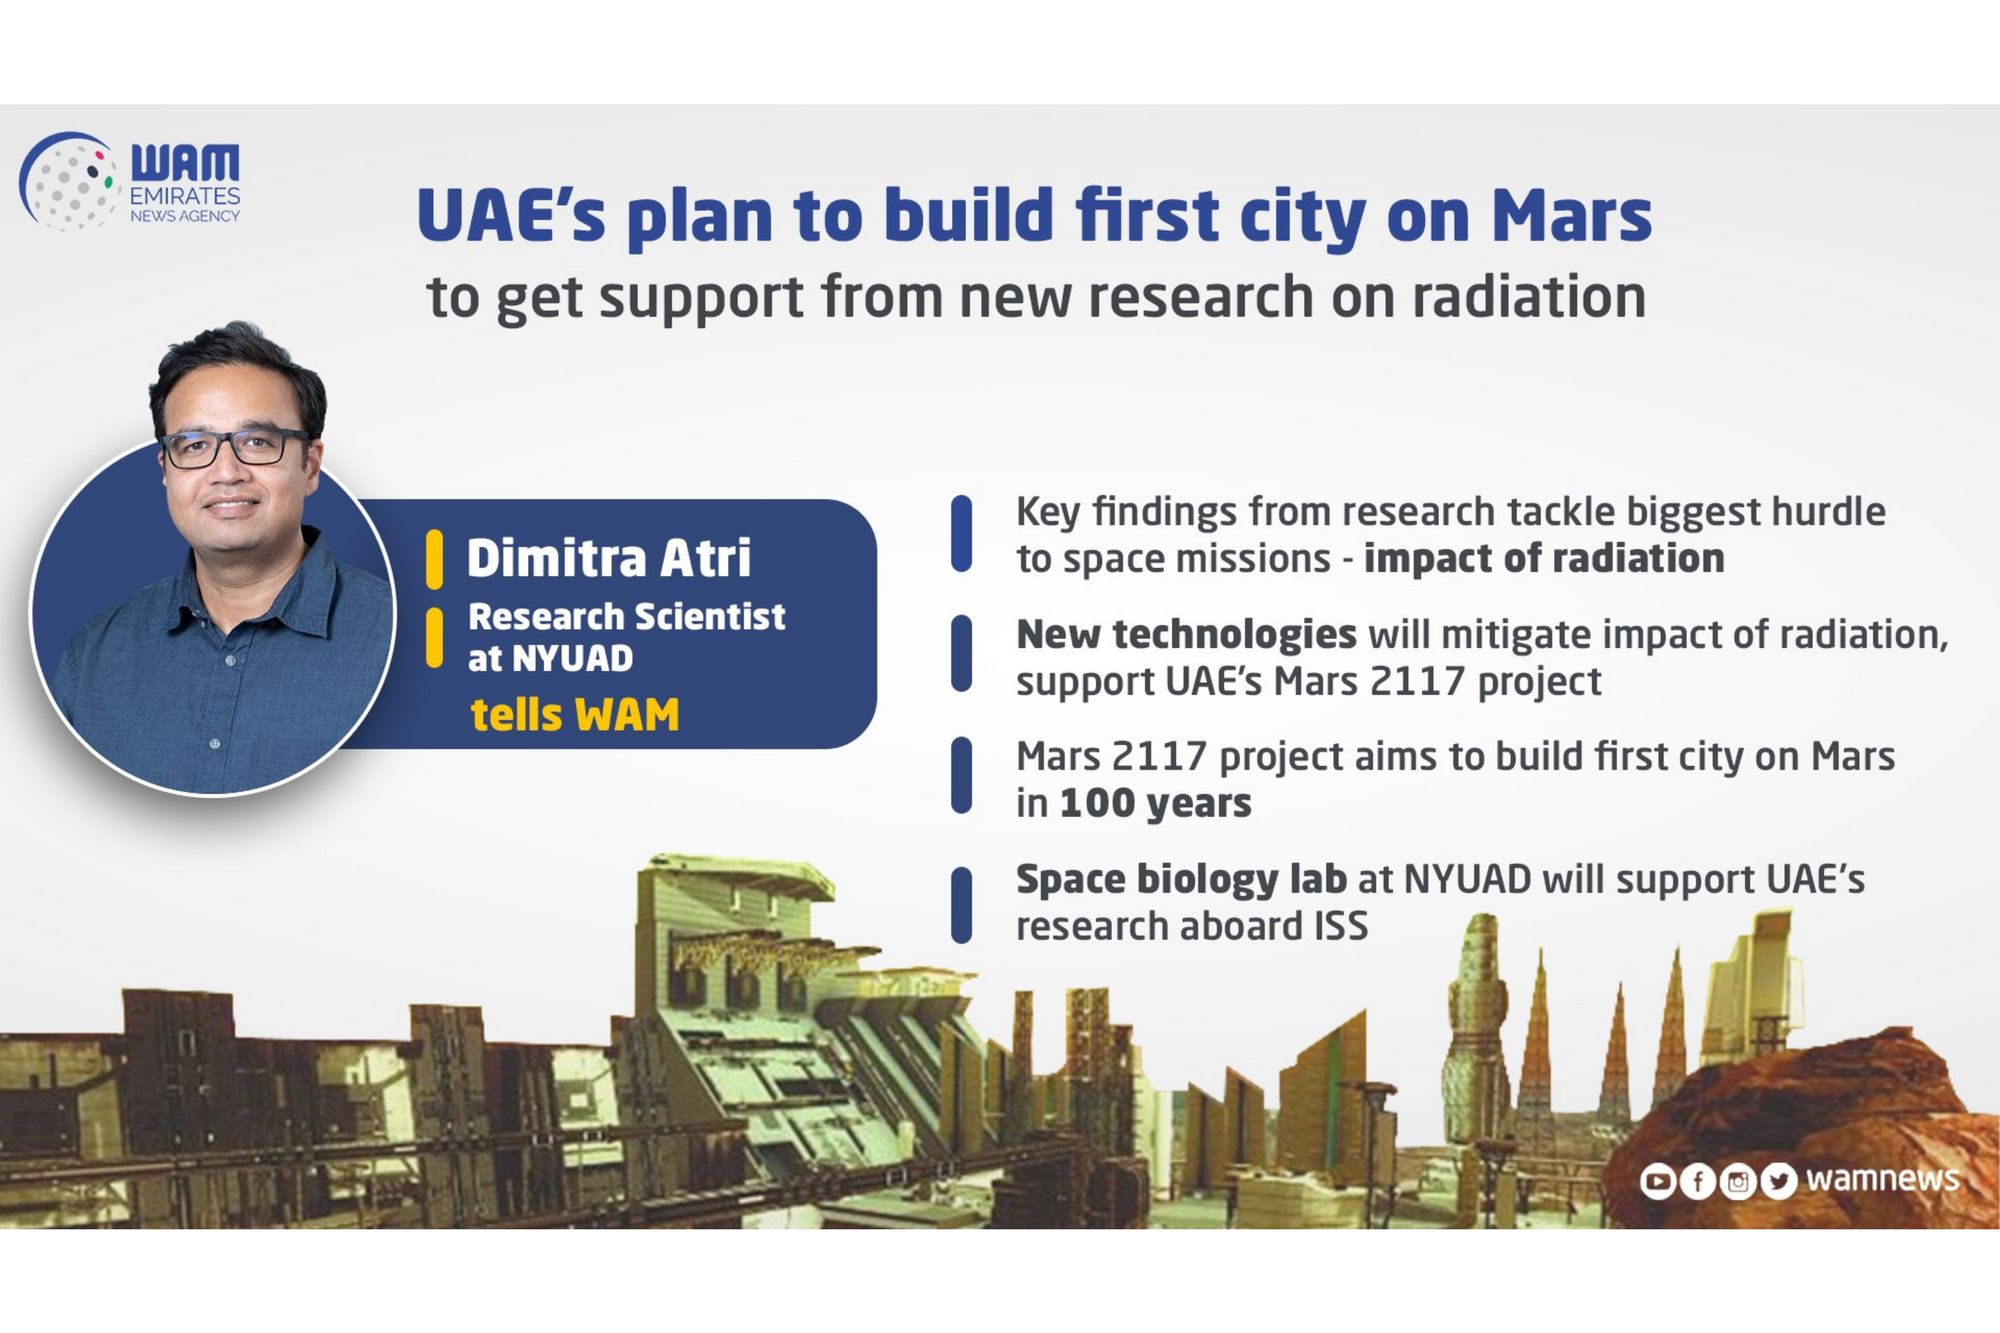 UAE’s planned city on Mars to get help from NYUAD research on radiation